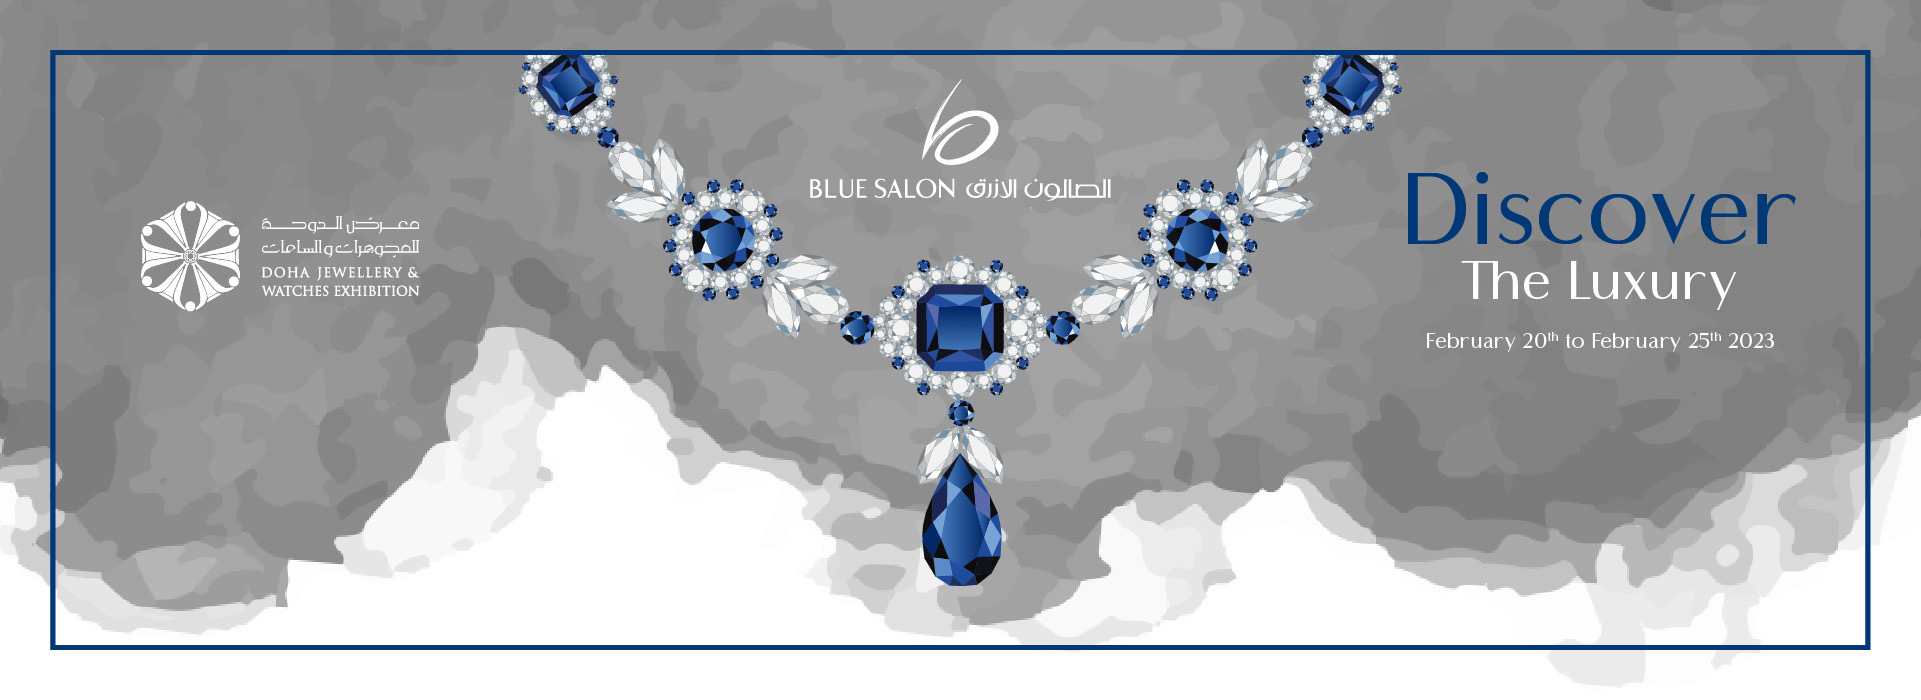 Discover the Luxury <strong>Blue Salon’s pavilion at the Doha Jewellery and Watches Exhibition is a must-see</strong>